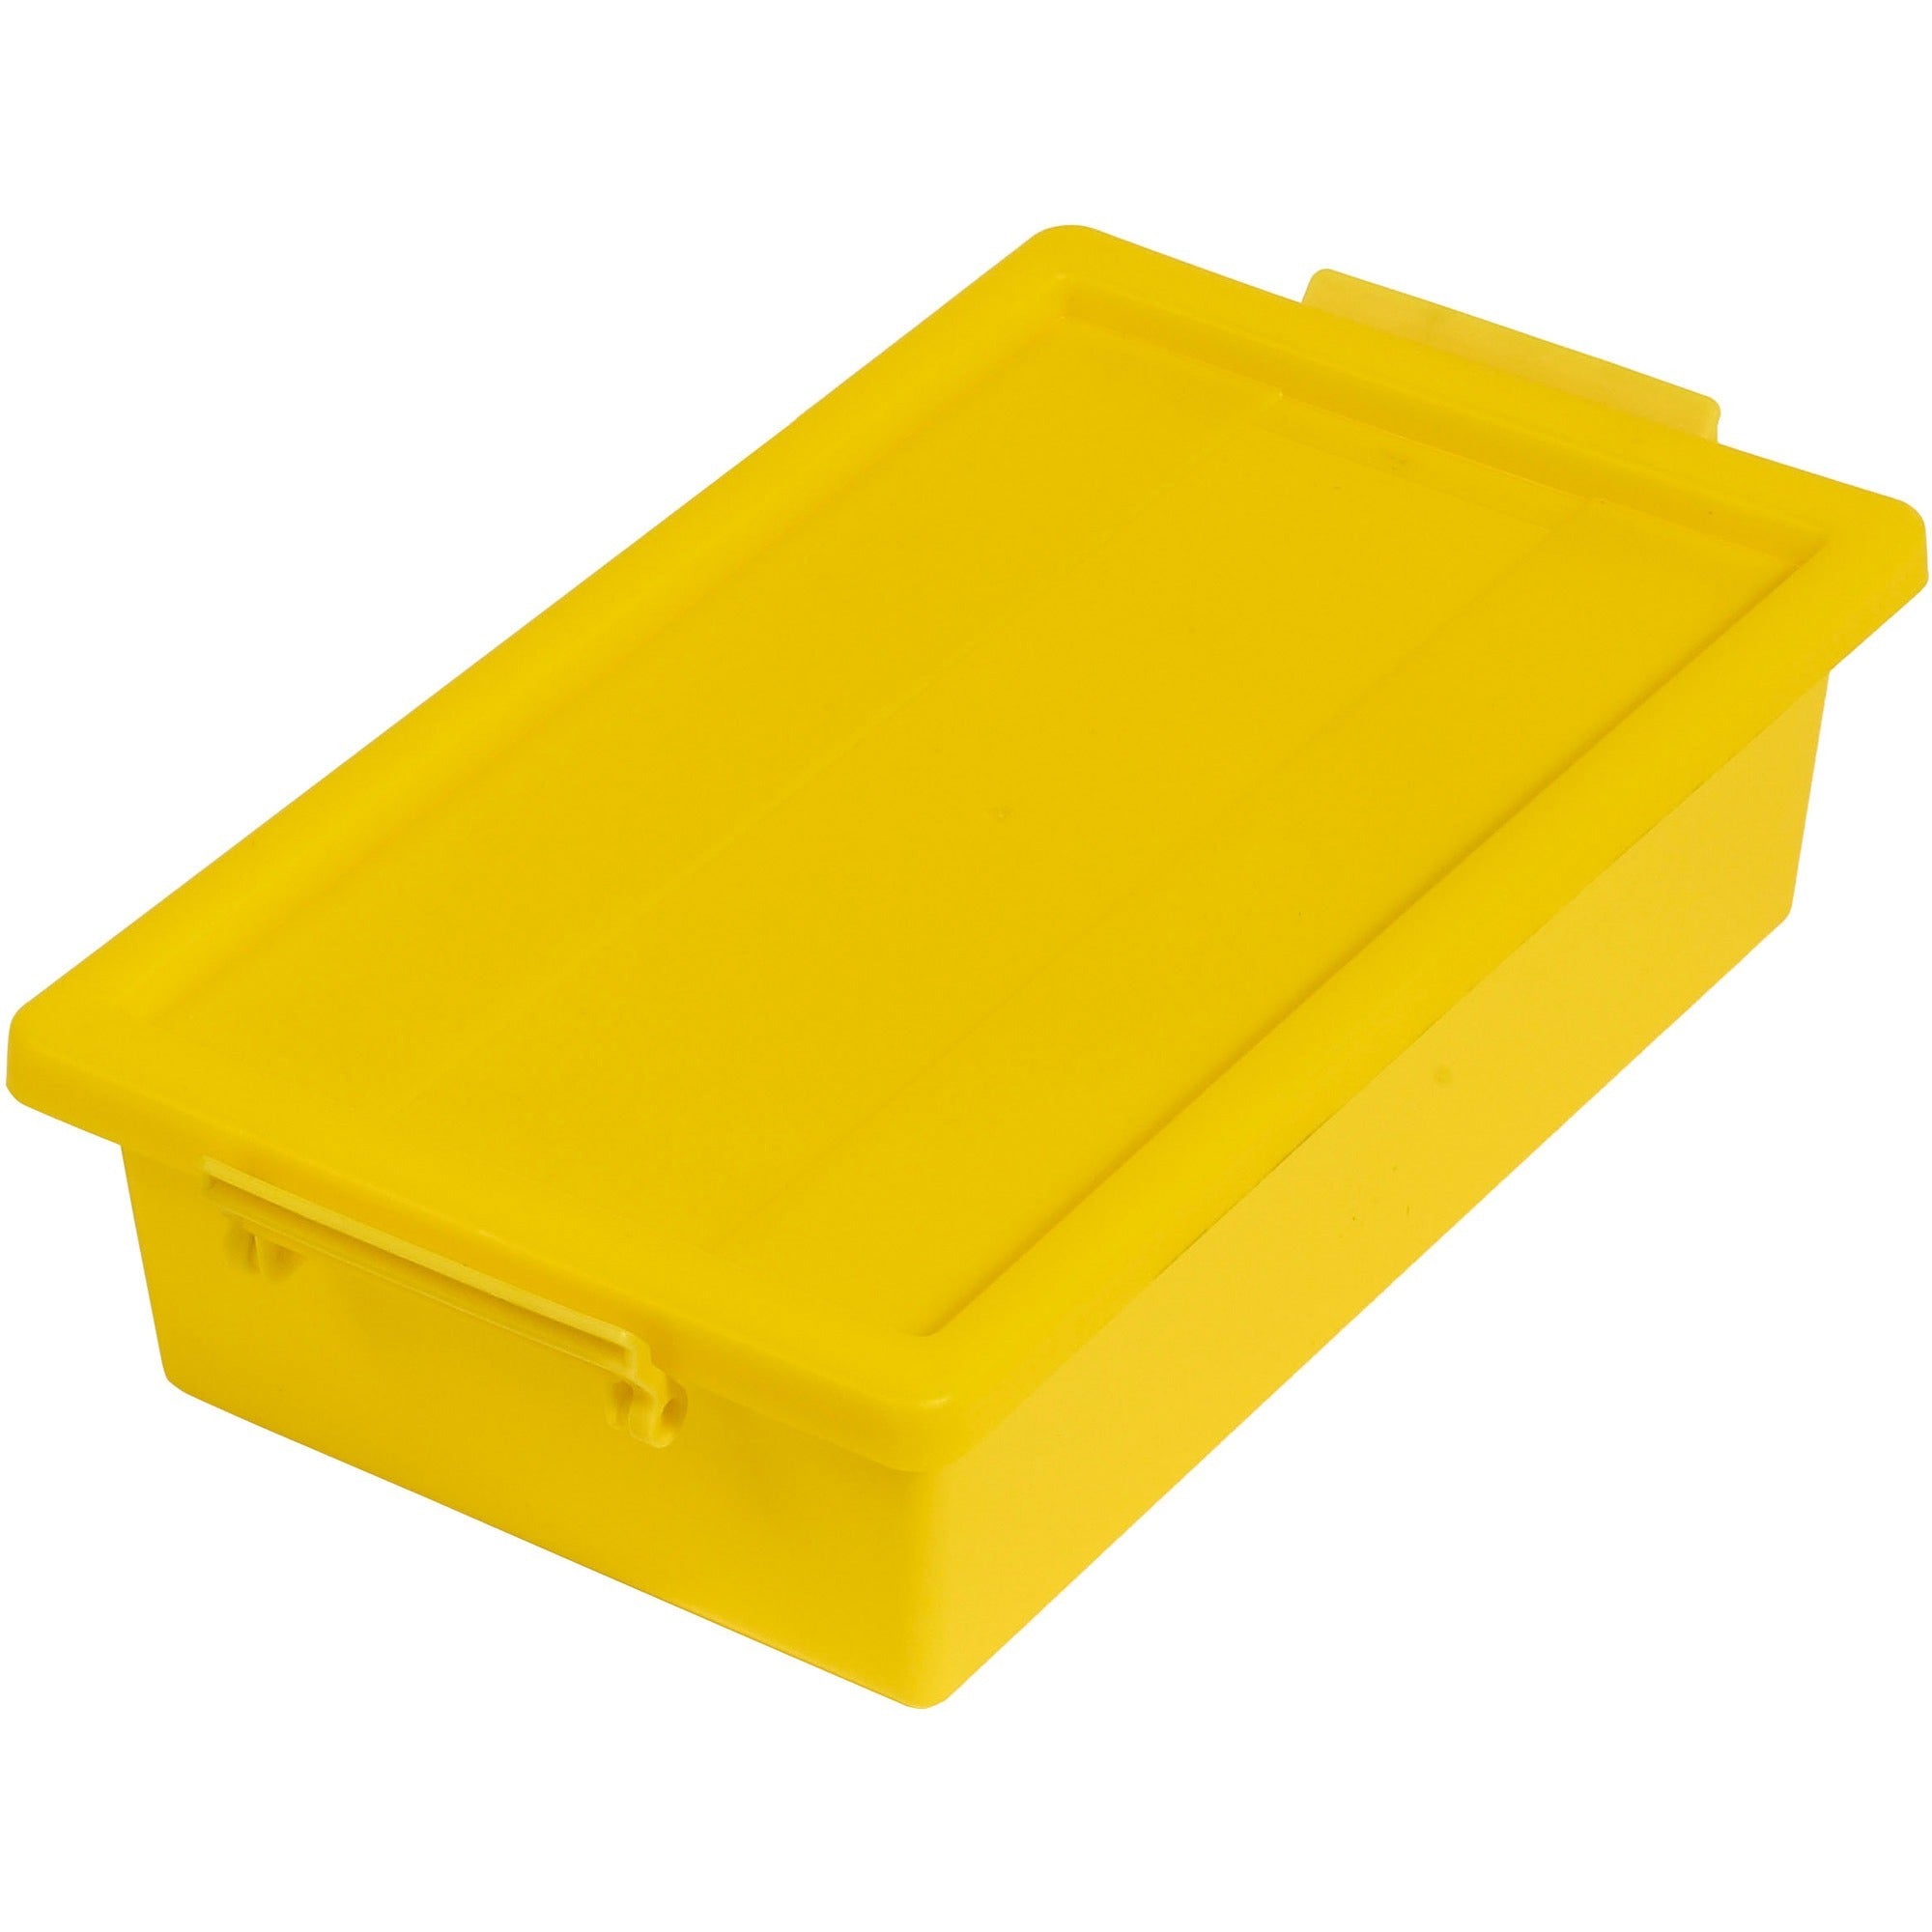 deflecto-little-artist-antimicrobial-storage-tote-31-height-x-119-width-x-68-depth-antimicrobial-lightweight-mold-resistant-mildew-resistant-handle-portable-stackable-durable-spill-resistant-easy-to-clean-yellow-polypropylene-_def39513yel - 2